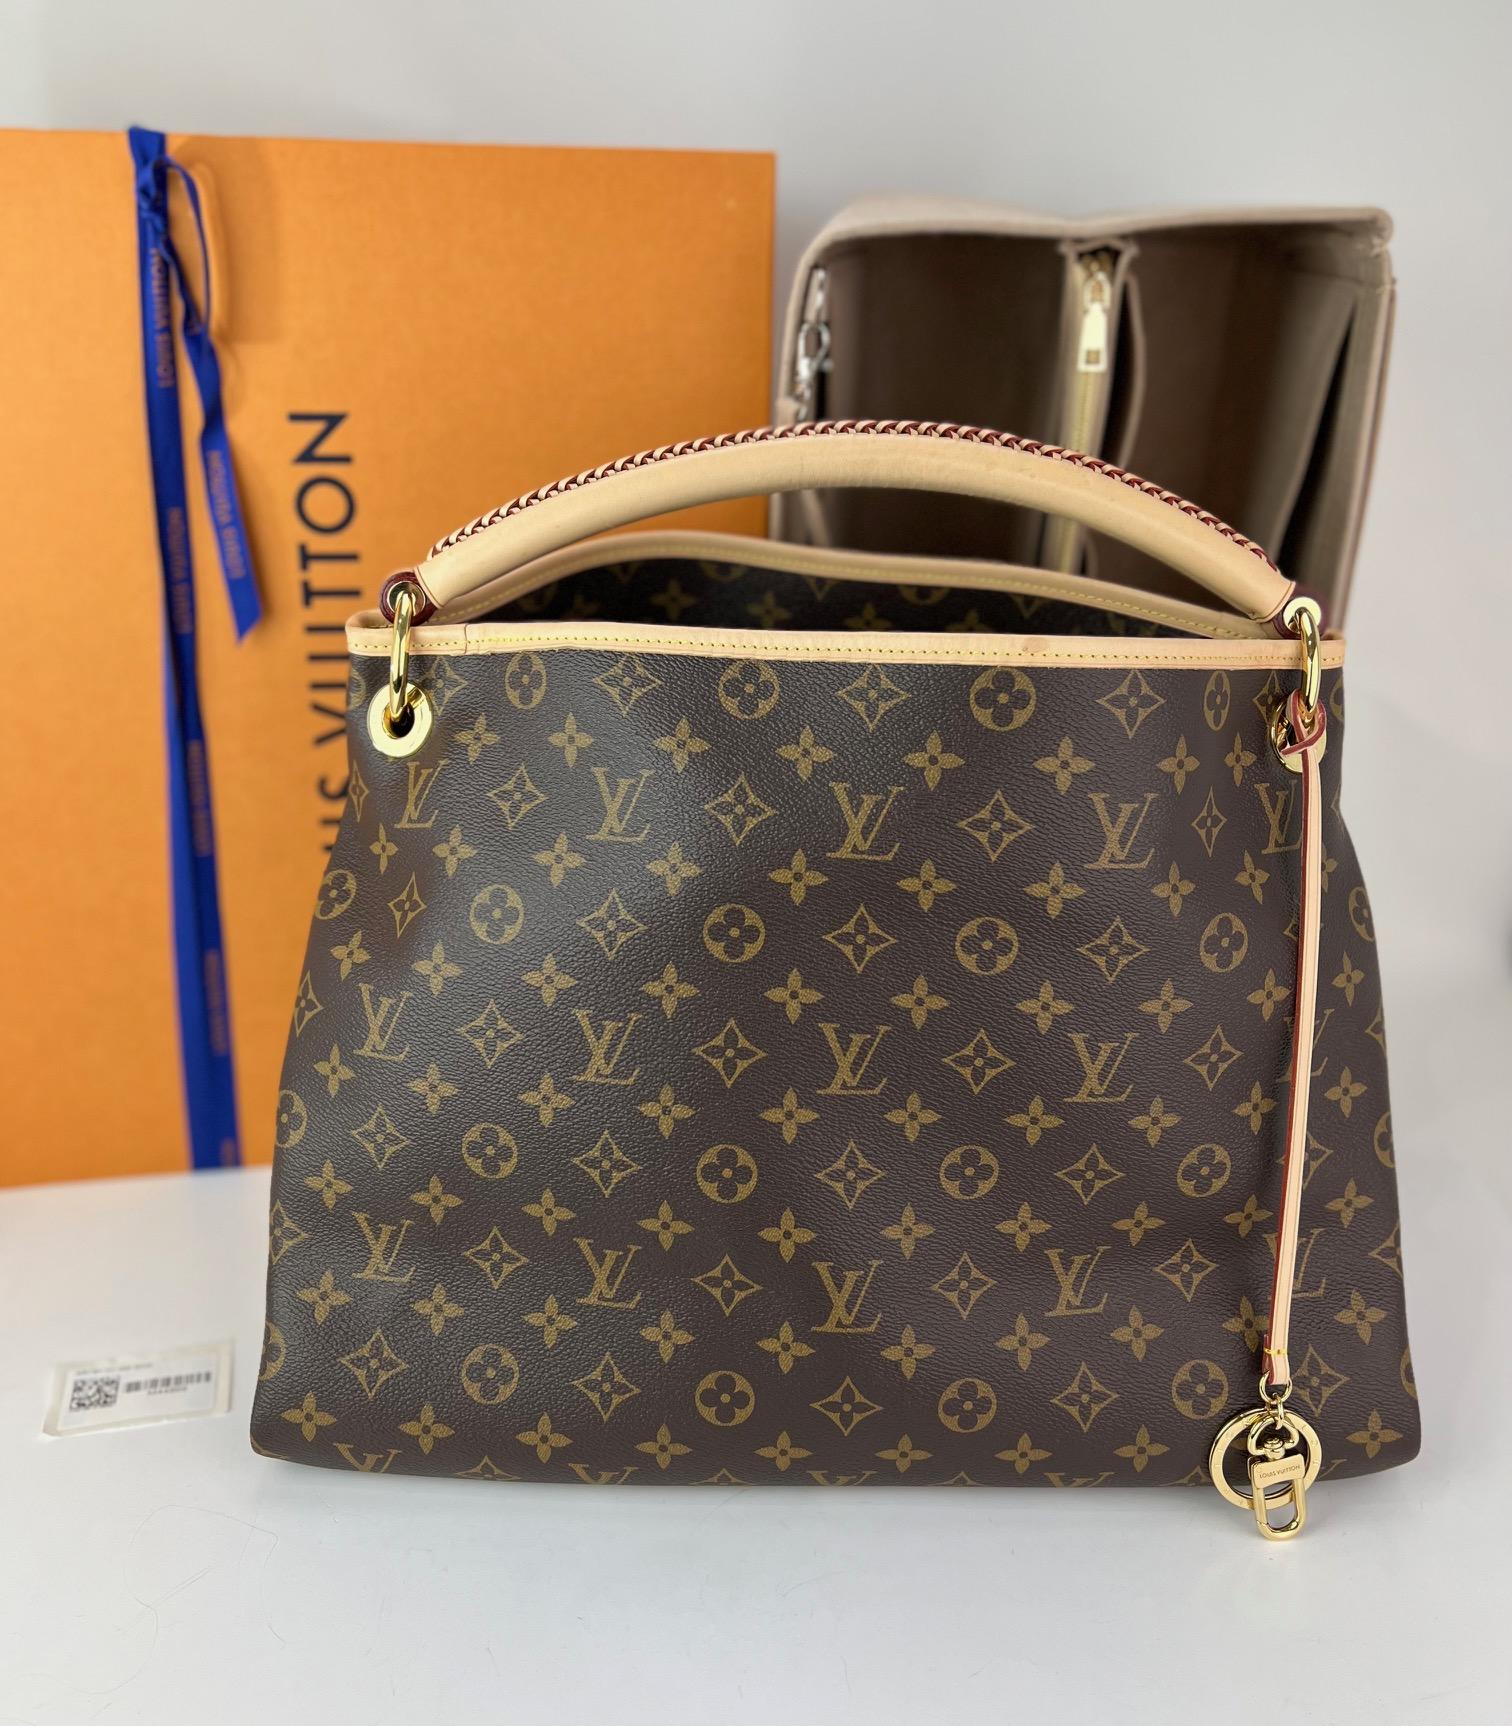 Pre-Owned 100% Authentic
Louis Vuitton Artsy MM Monogram W/added
Insert to help keep Structured & Organized
RATING: A..excellent, near mint, only
slight signs of wear
HANDLE: leather, few tiny very light
DROP: 3''
MATERIAL: monogram canvas
COLOR: